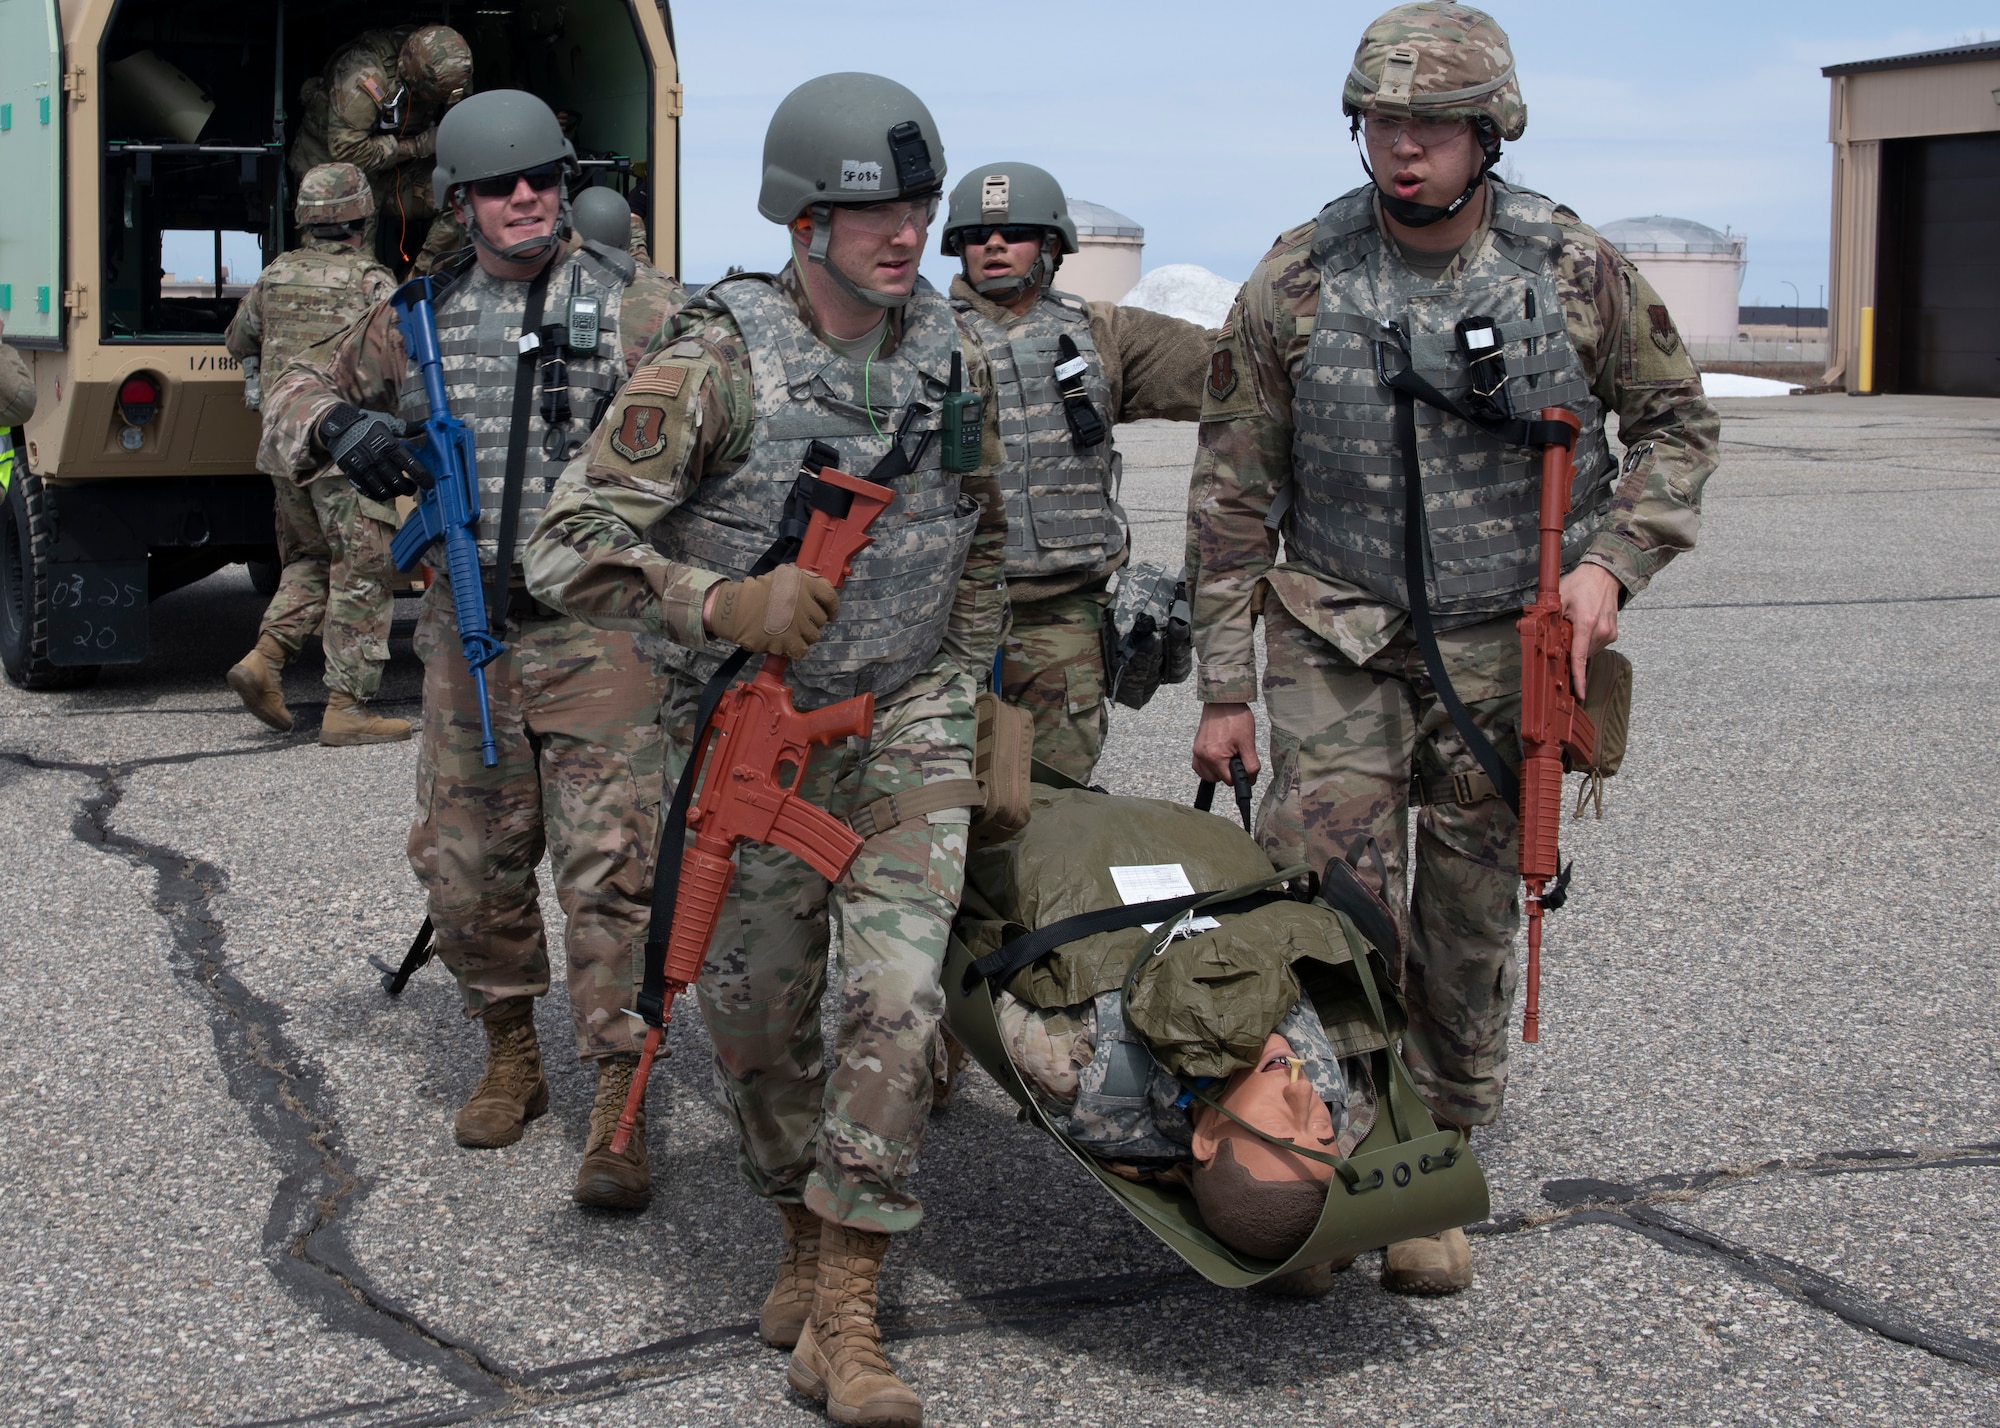 Servicemembers carry a mannequin on a stretcher.